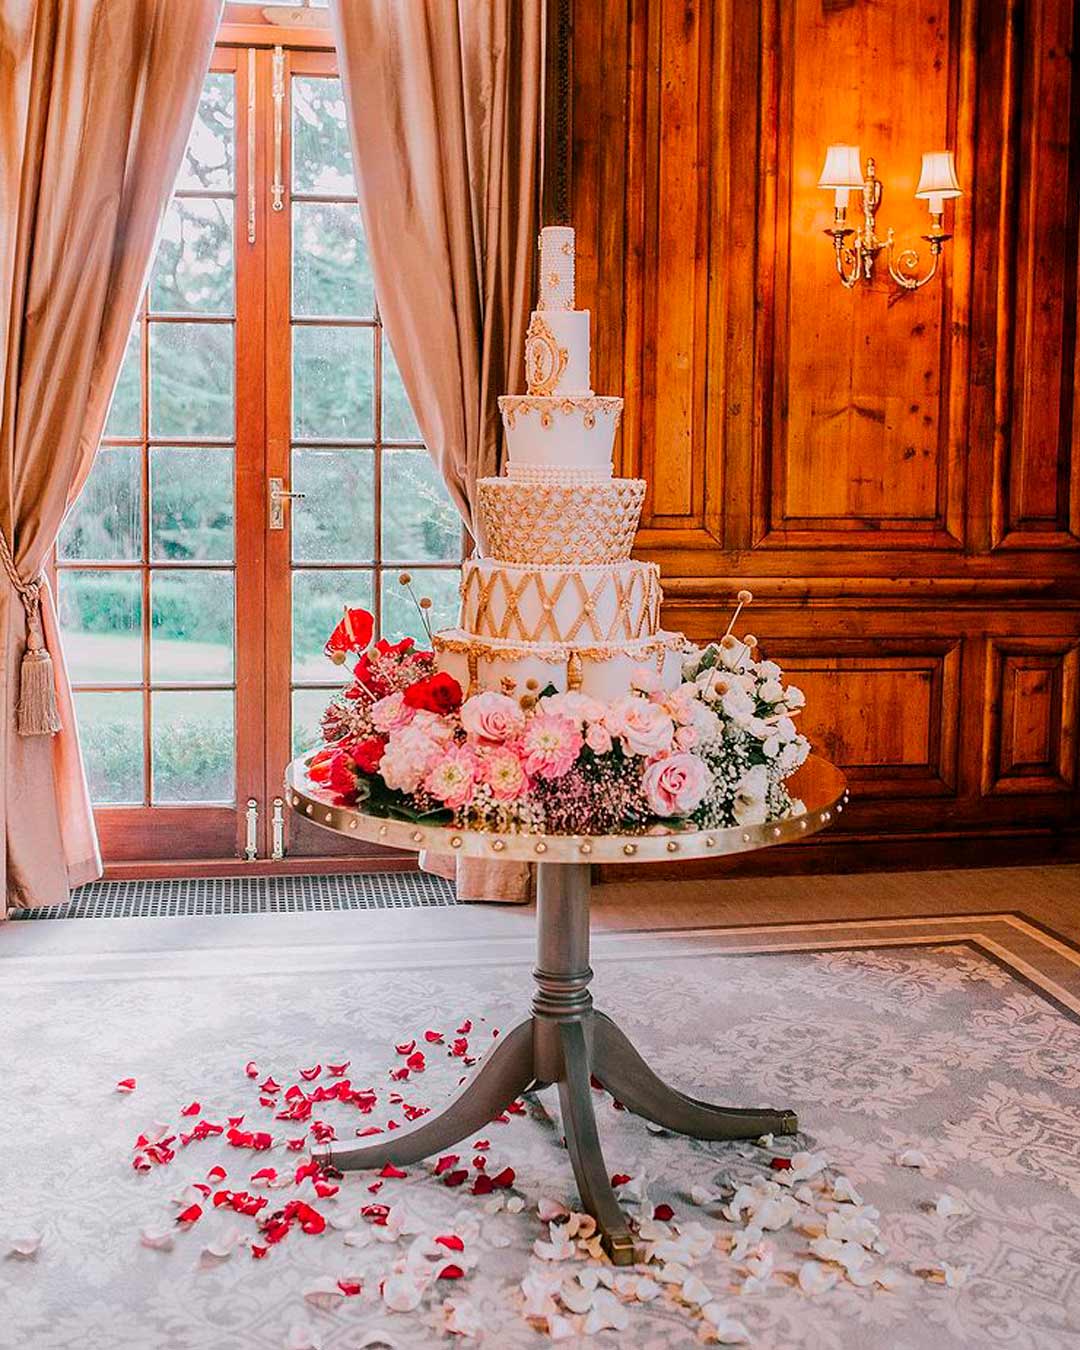 Average Price Of A Wedding Cake: A 2021 Guide For You